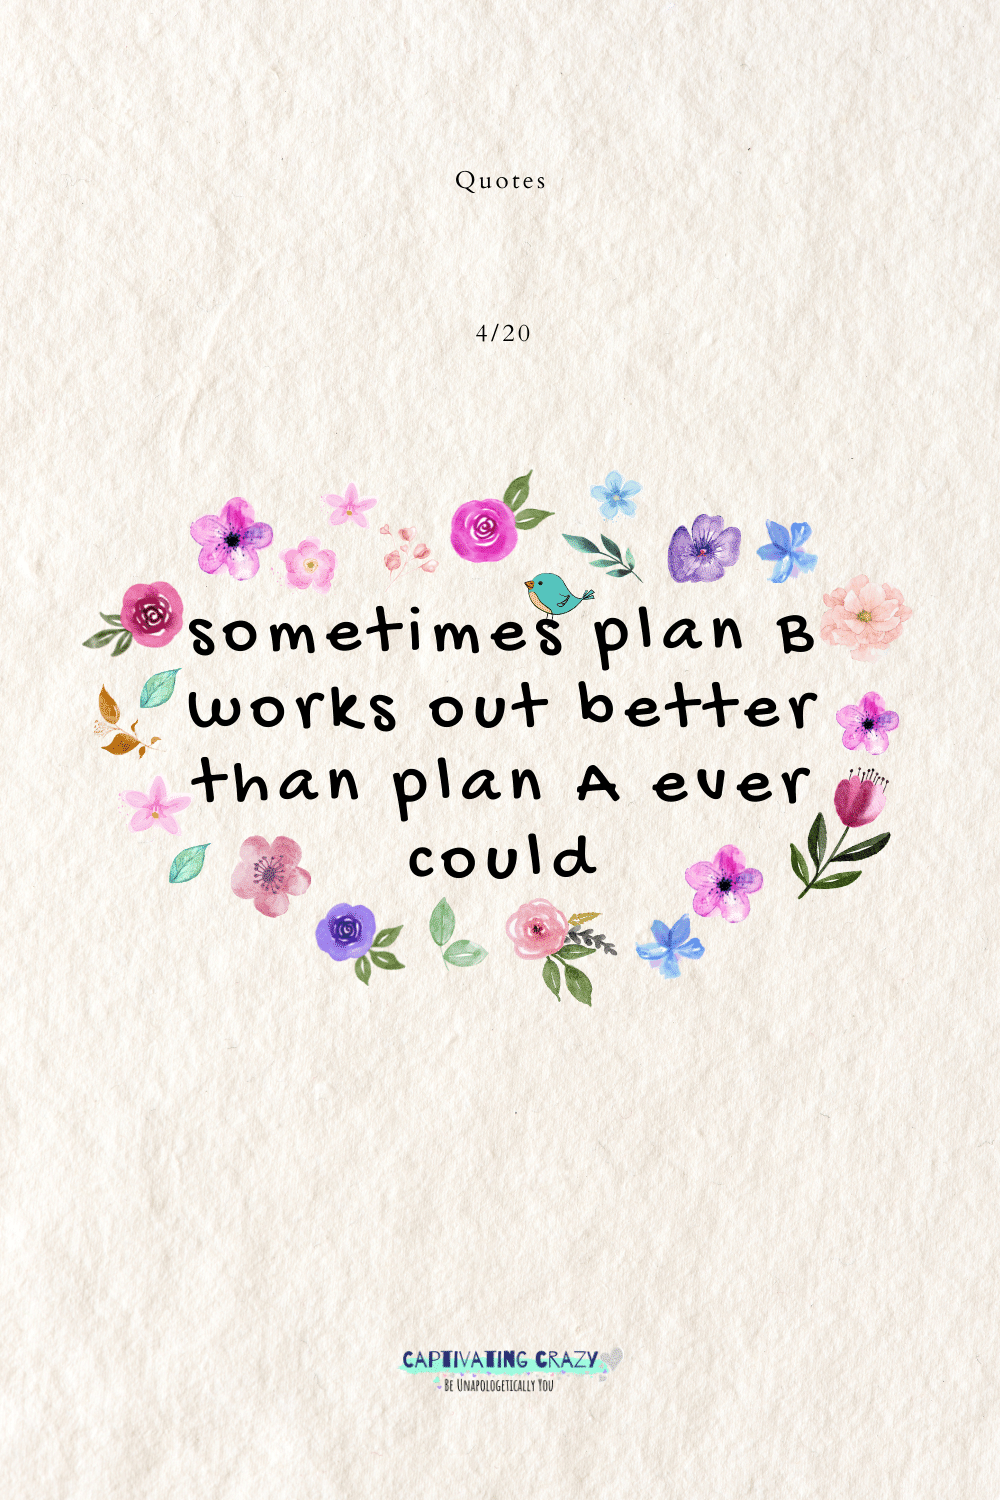 Sometimes plan B works out better than plan A ever could.